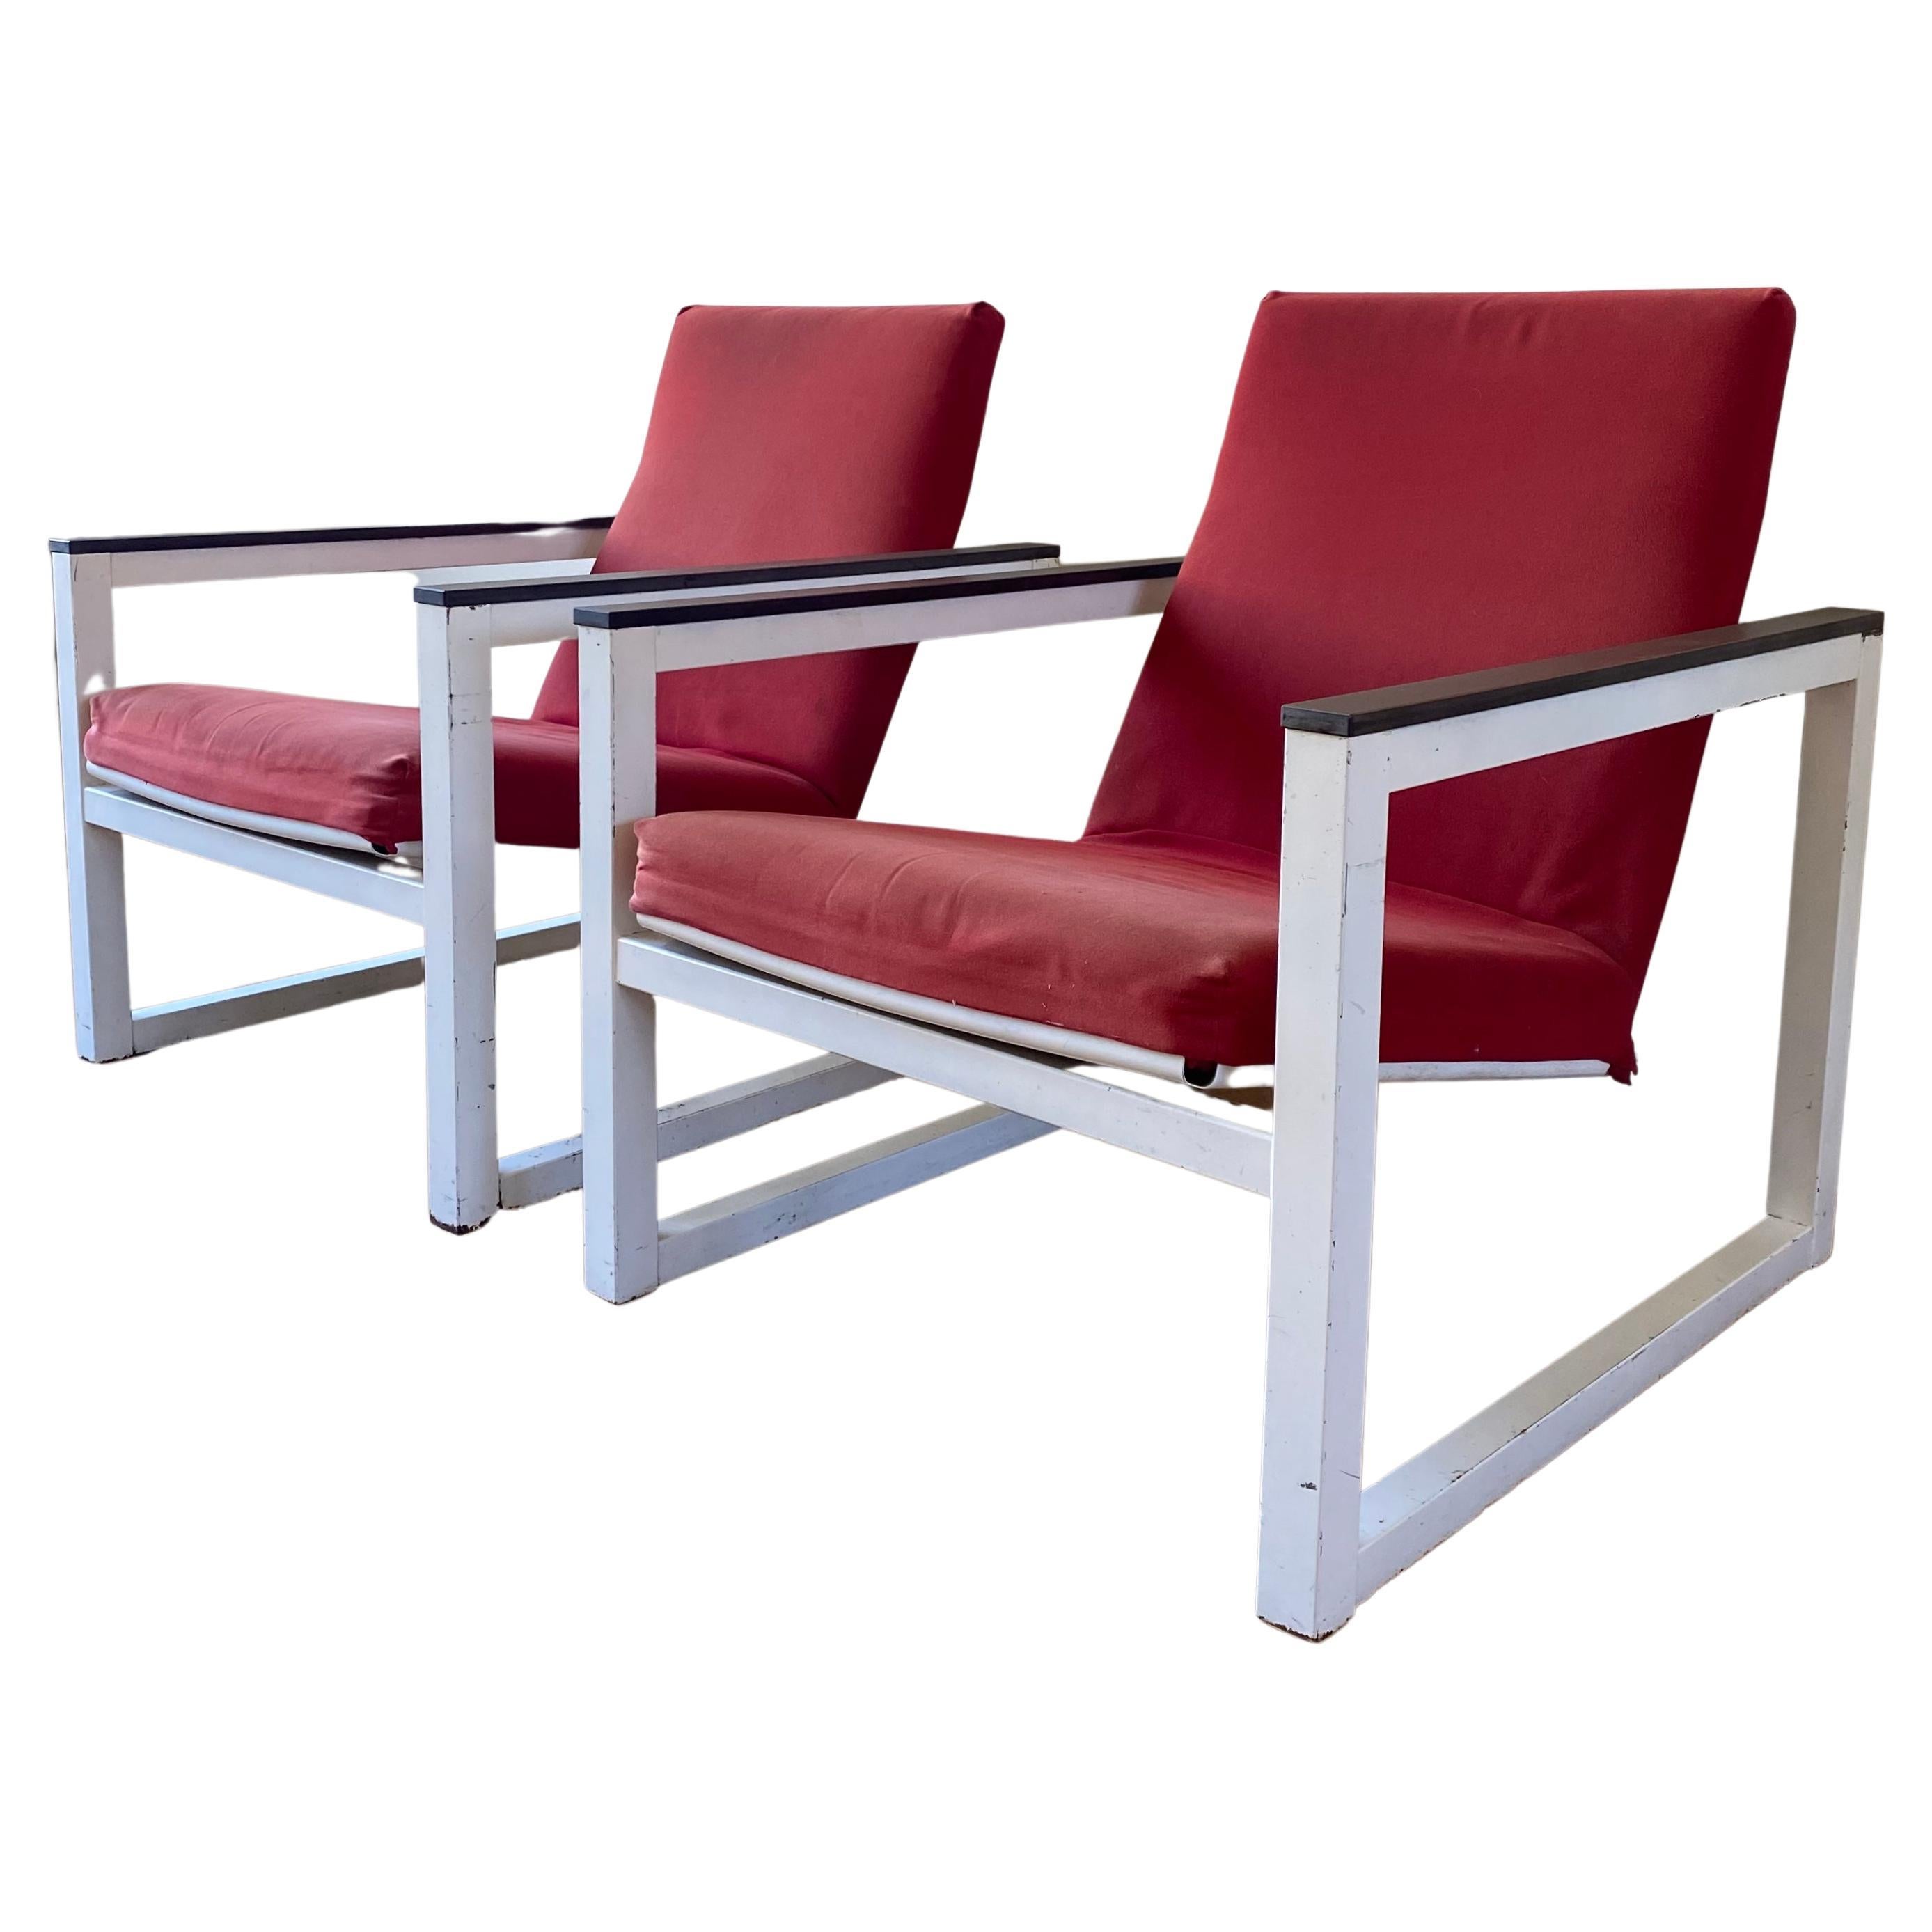 Rare Lounge Chairs by Tjerk Reijenga and Friso Kramer for Pilastro, 1960s For Sale